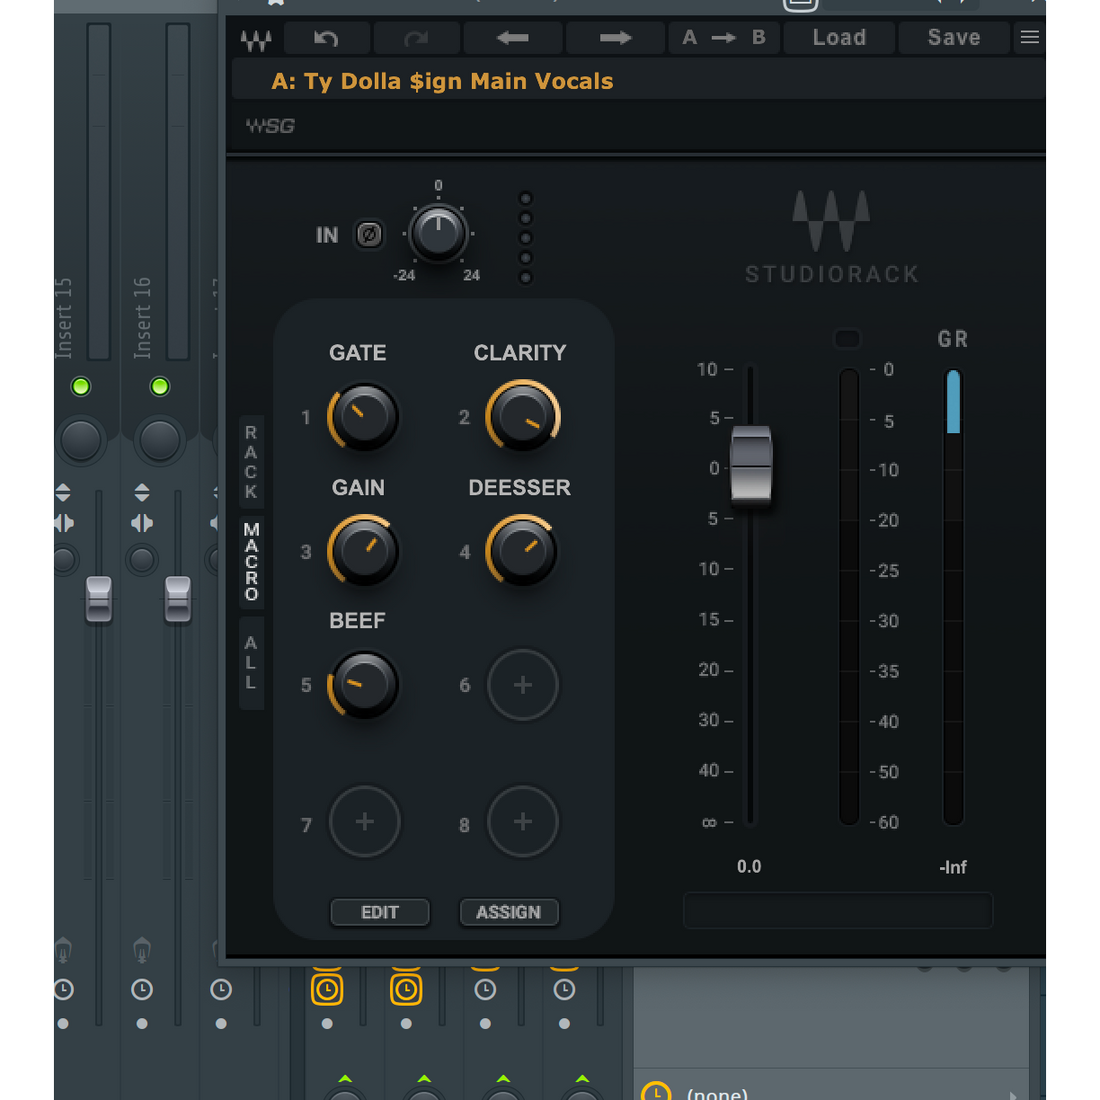 "Spice" WAVES Vocal Chain Preset